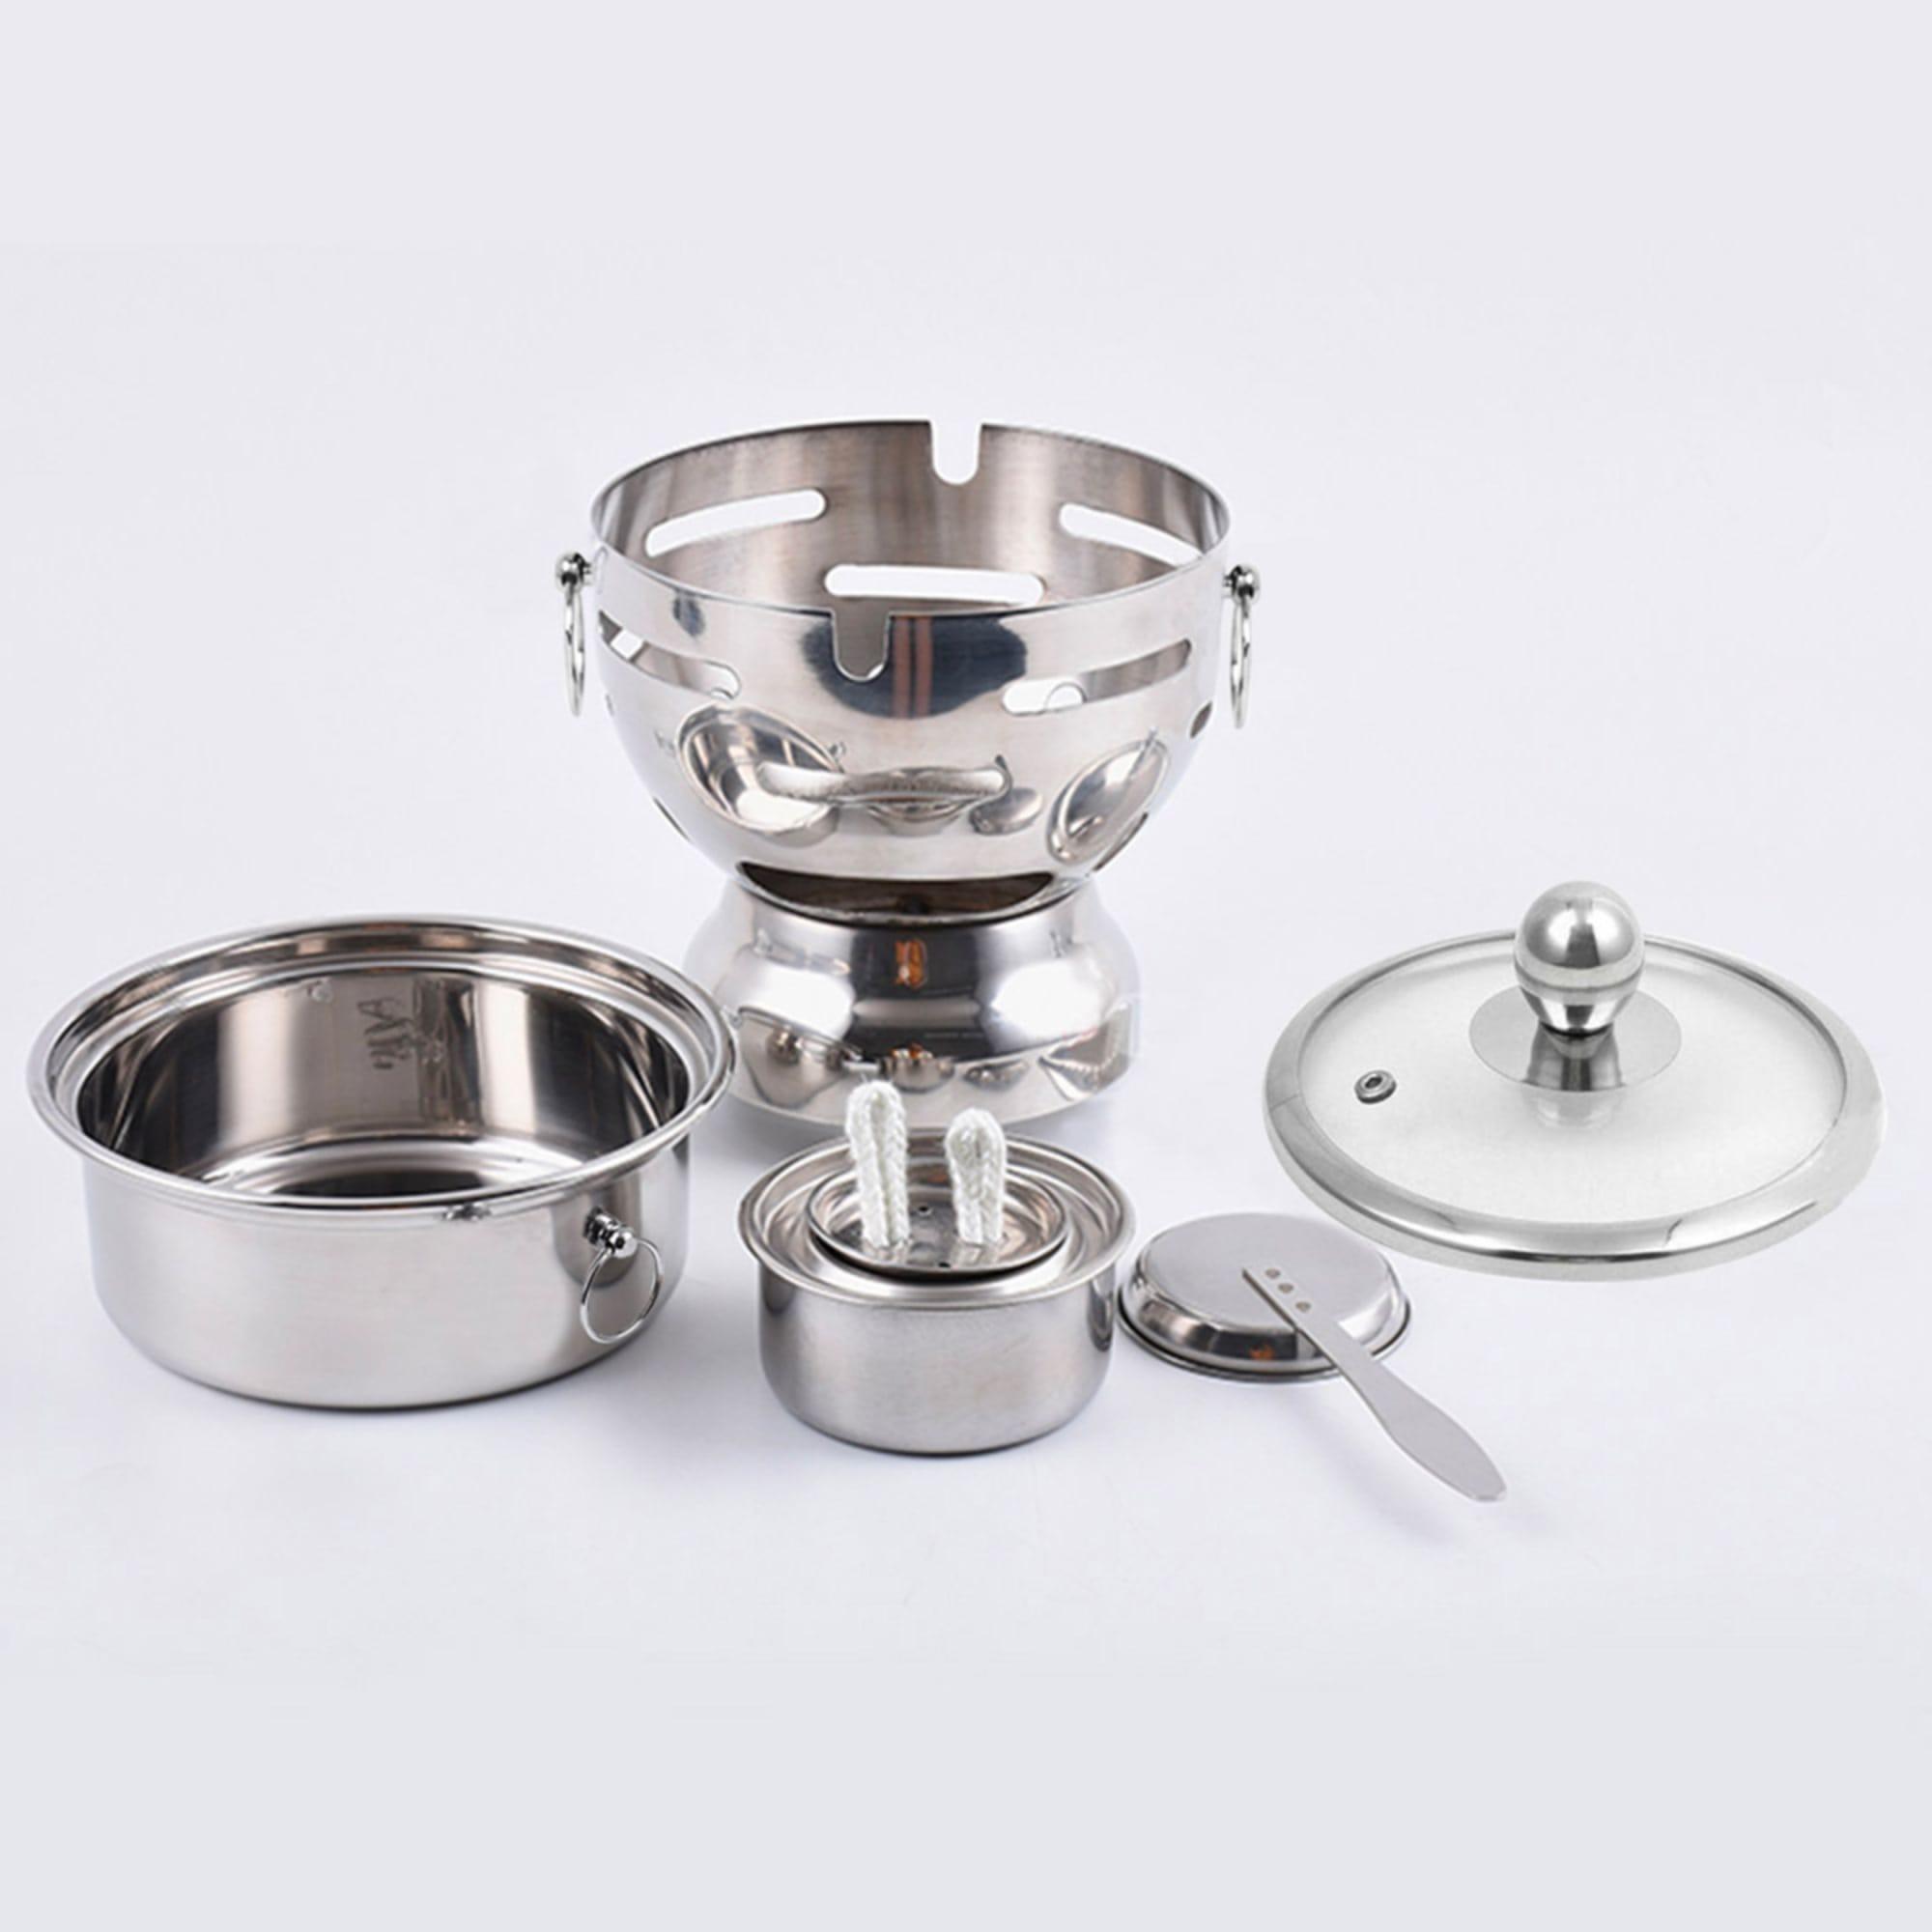 Soga Round Stainless Steel Single Hot Pot with Glass Lid 18.5cm Image 4